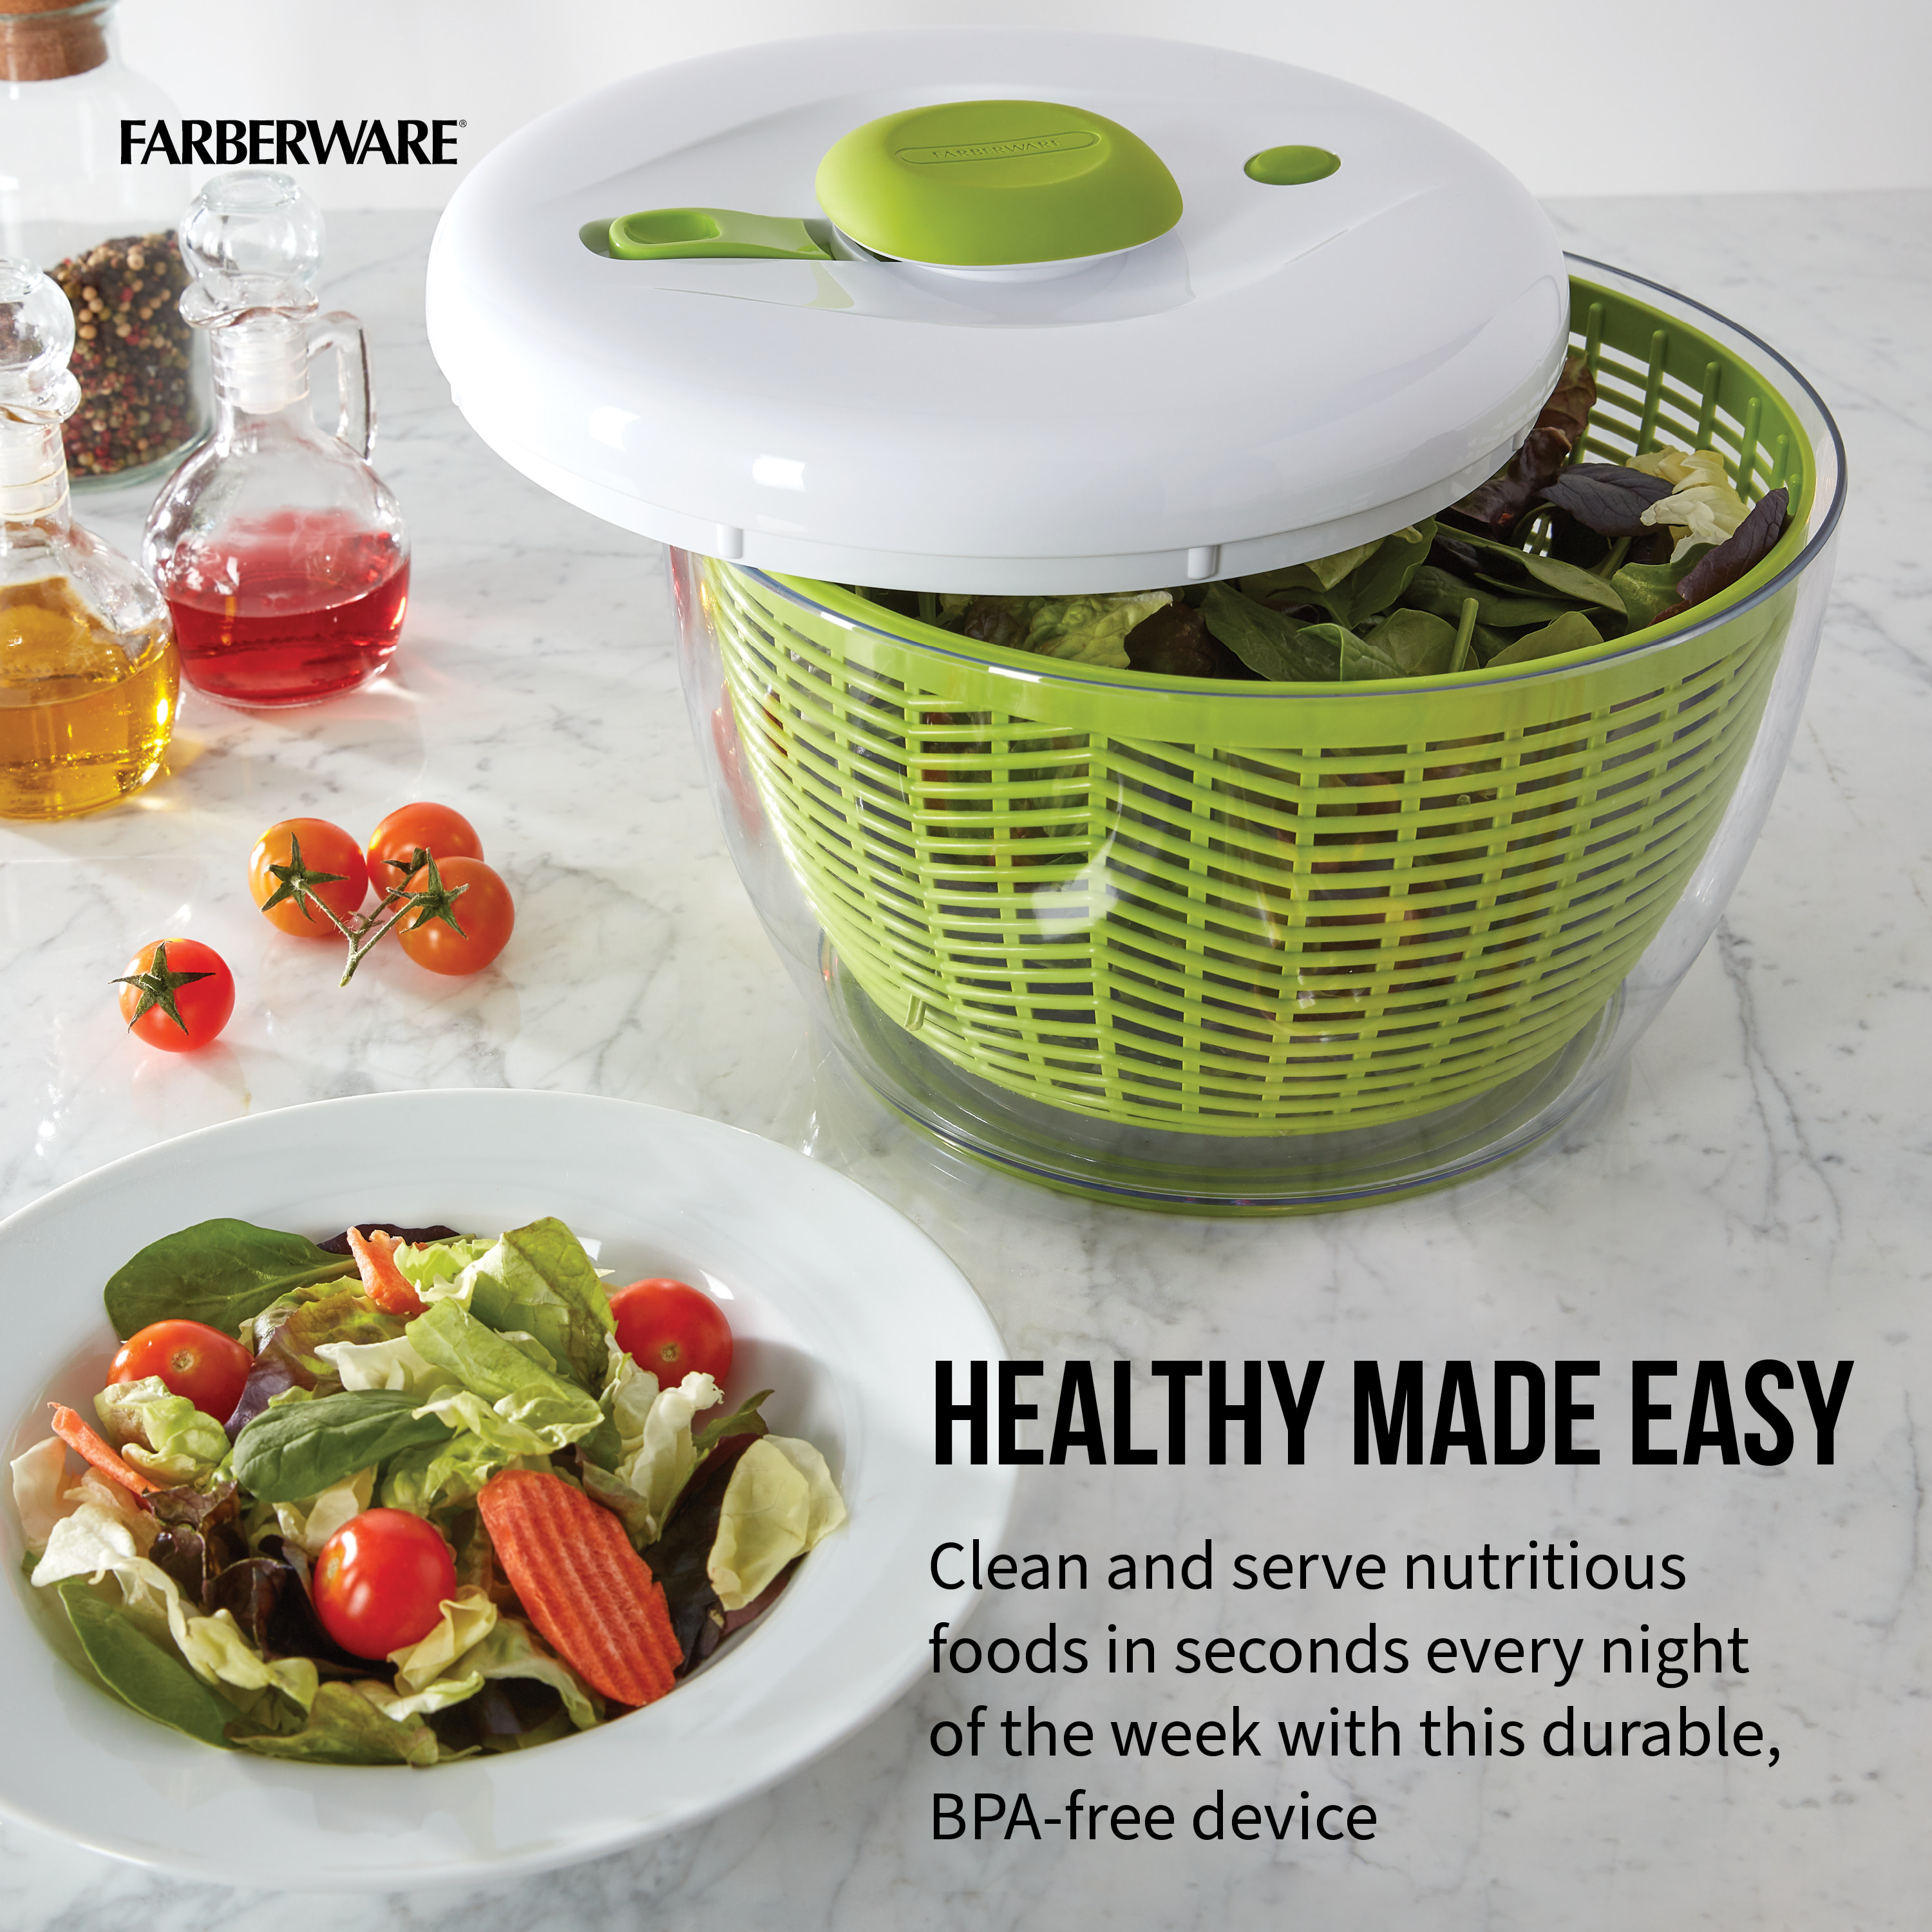 Farberware Professional Plastic 2.4 lb Salad Spinner Green with White Lid - image 3 of 26